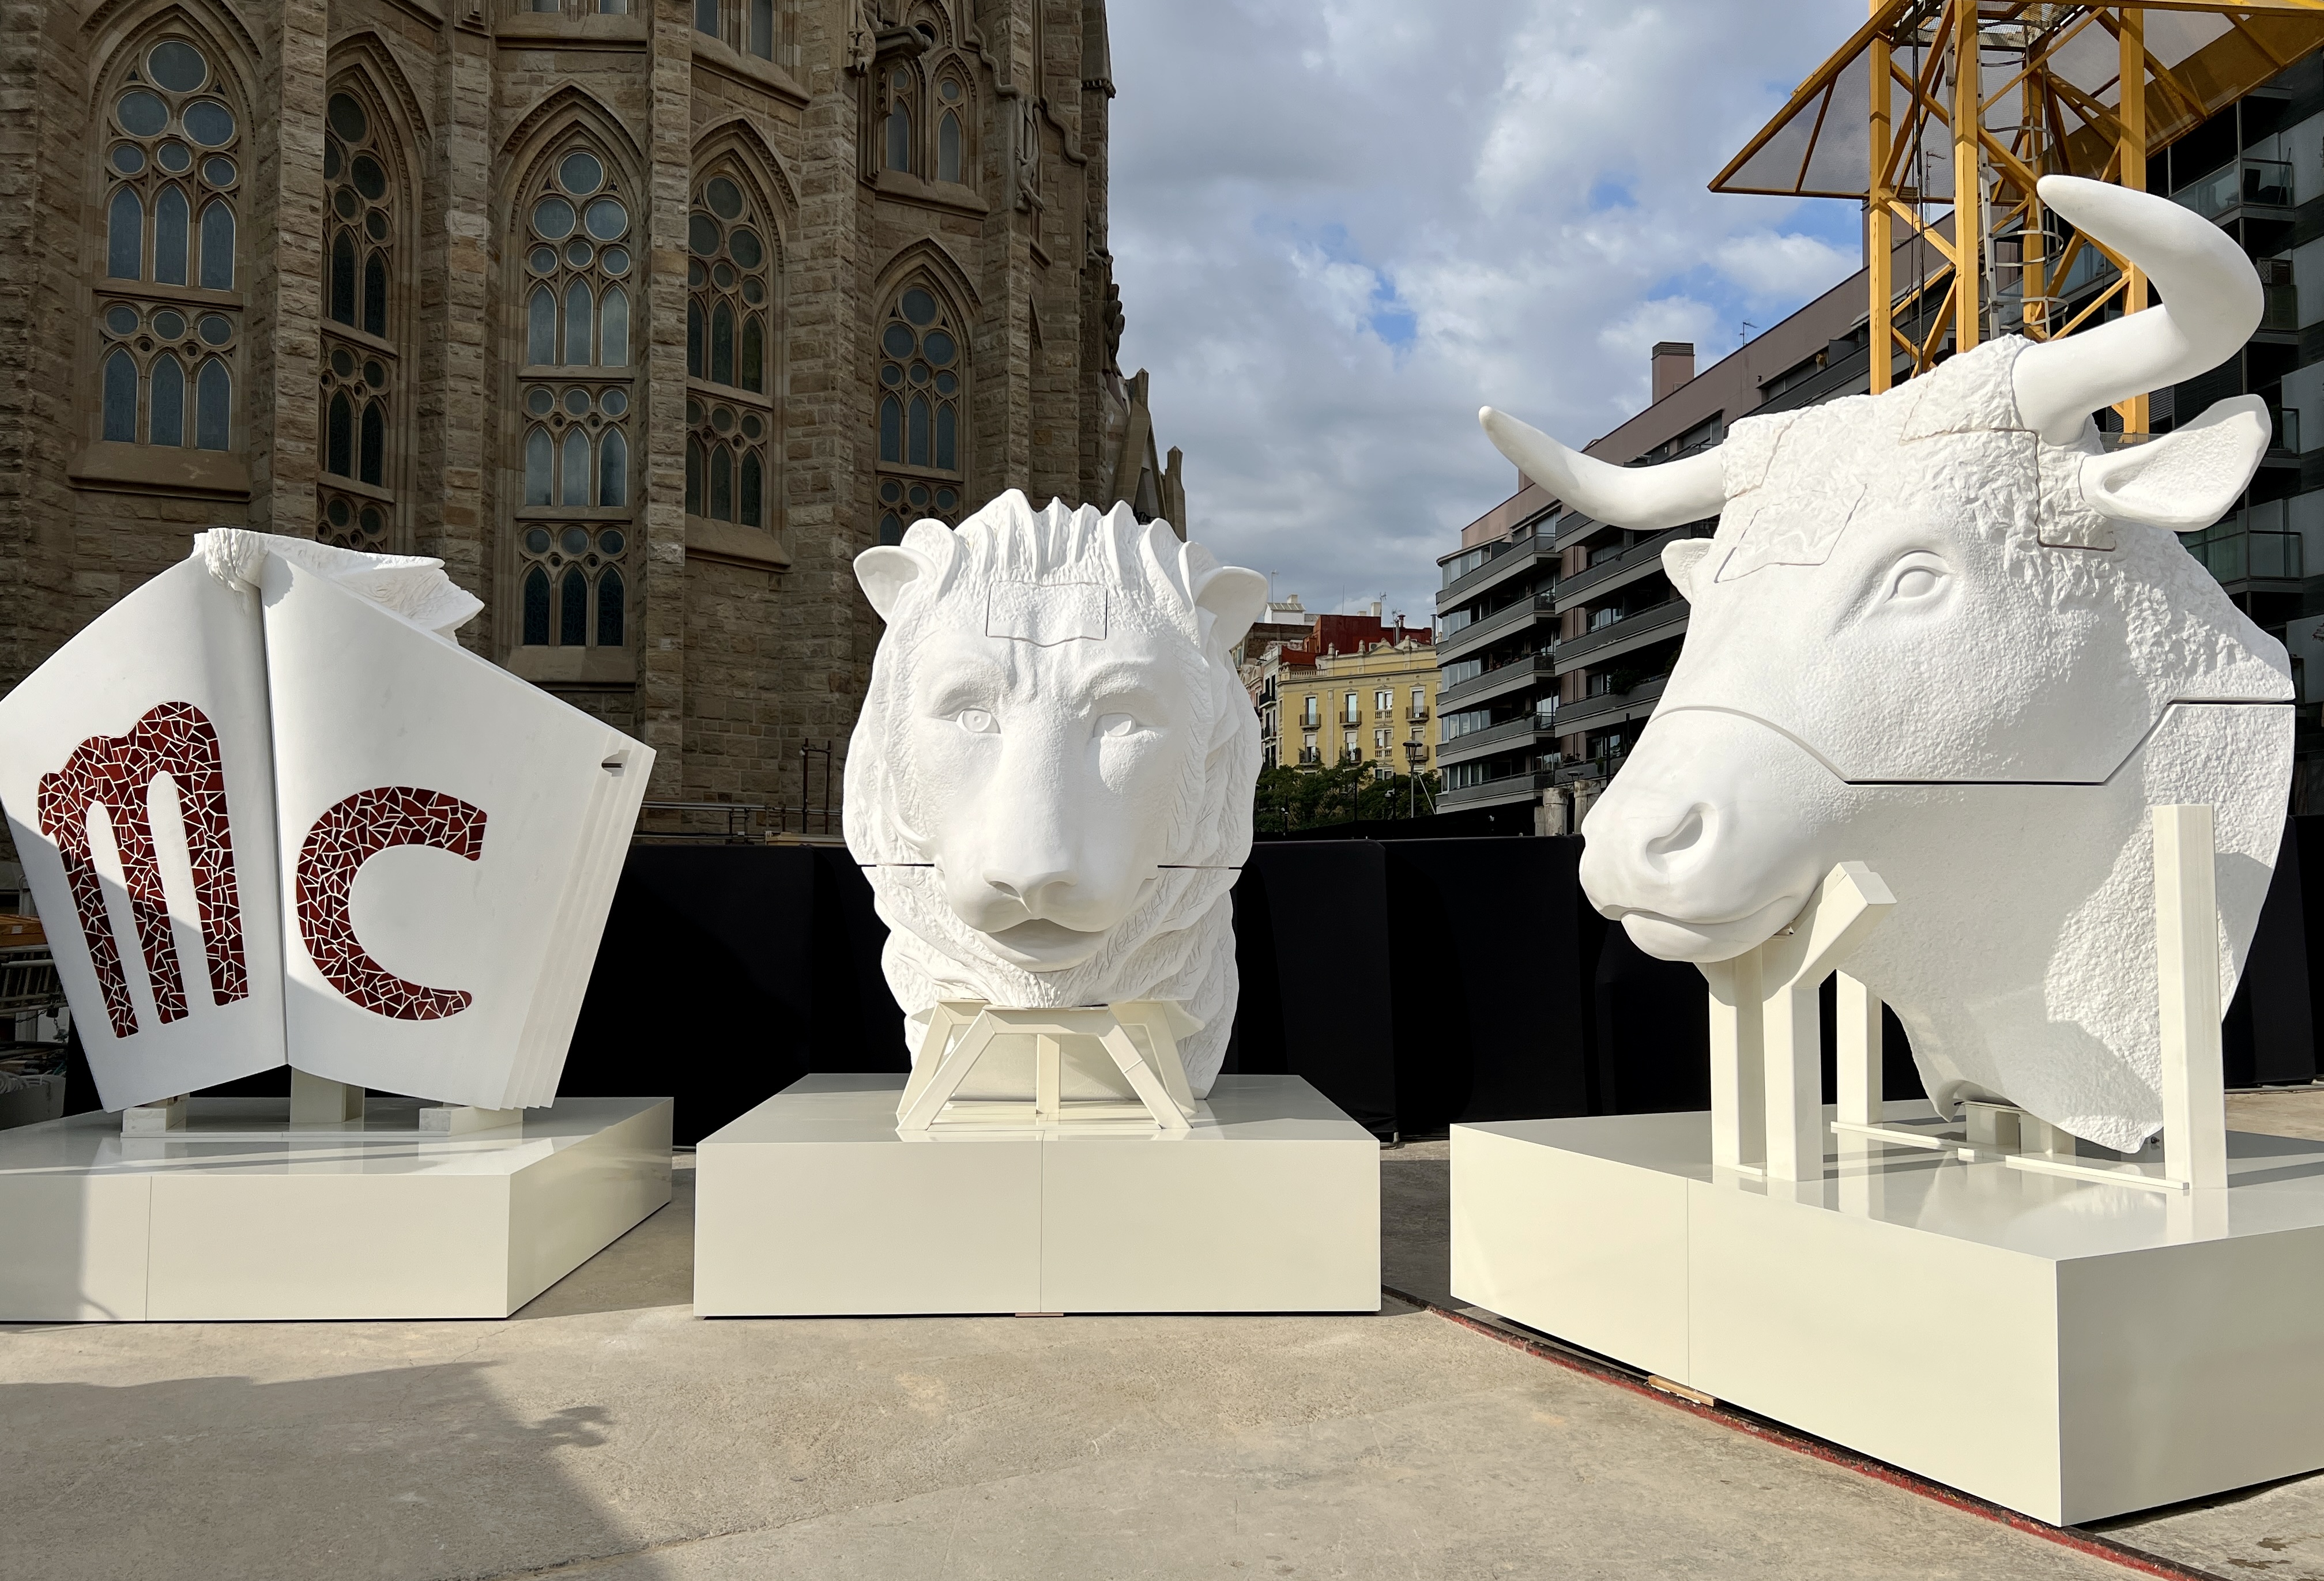 The bull and the lion representing Mark and Luke the Evangelists that will be placed on top of two towers of the Sagrada Família